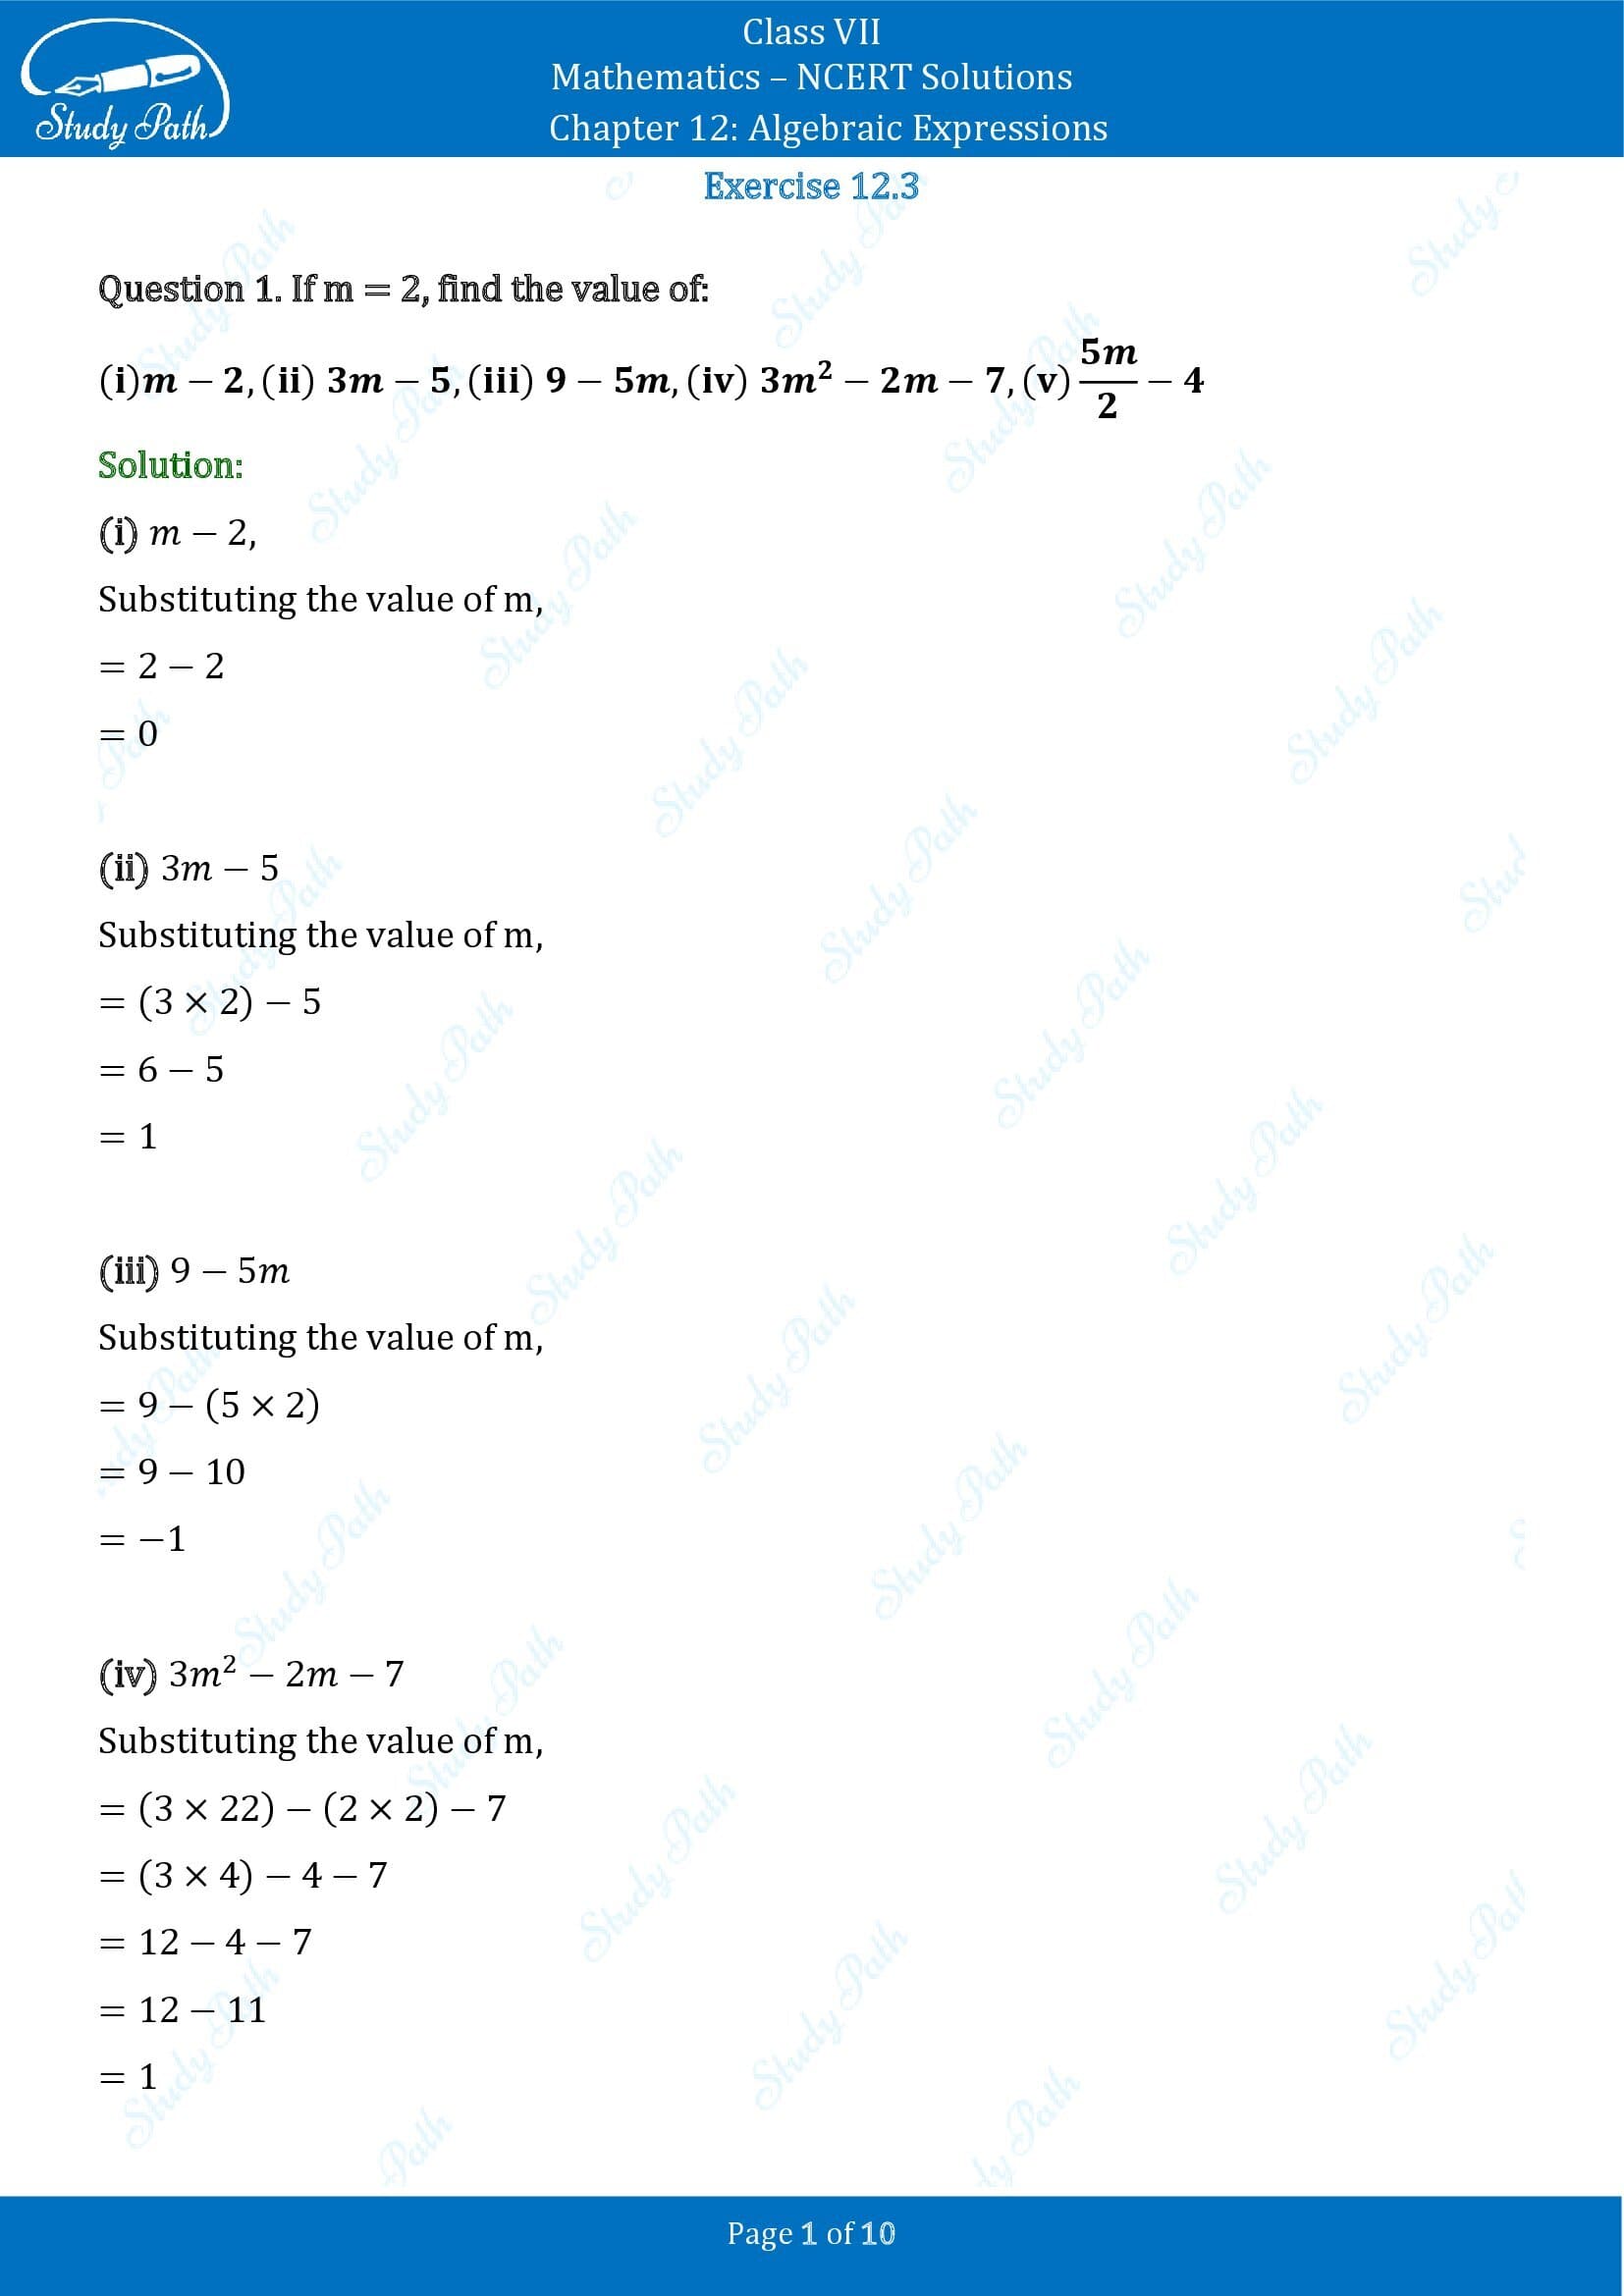 NCERT Solutions for Class 7 Maths Chapter 12 Algebraic Expressions Exercise 12.3 00001